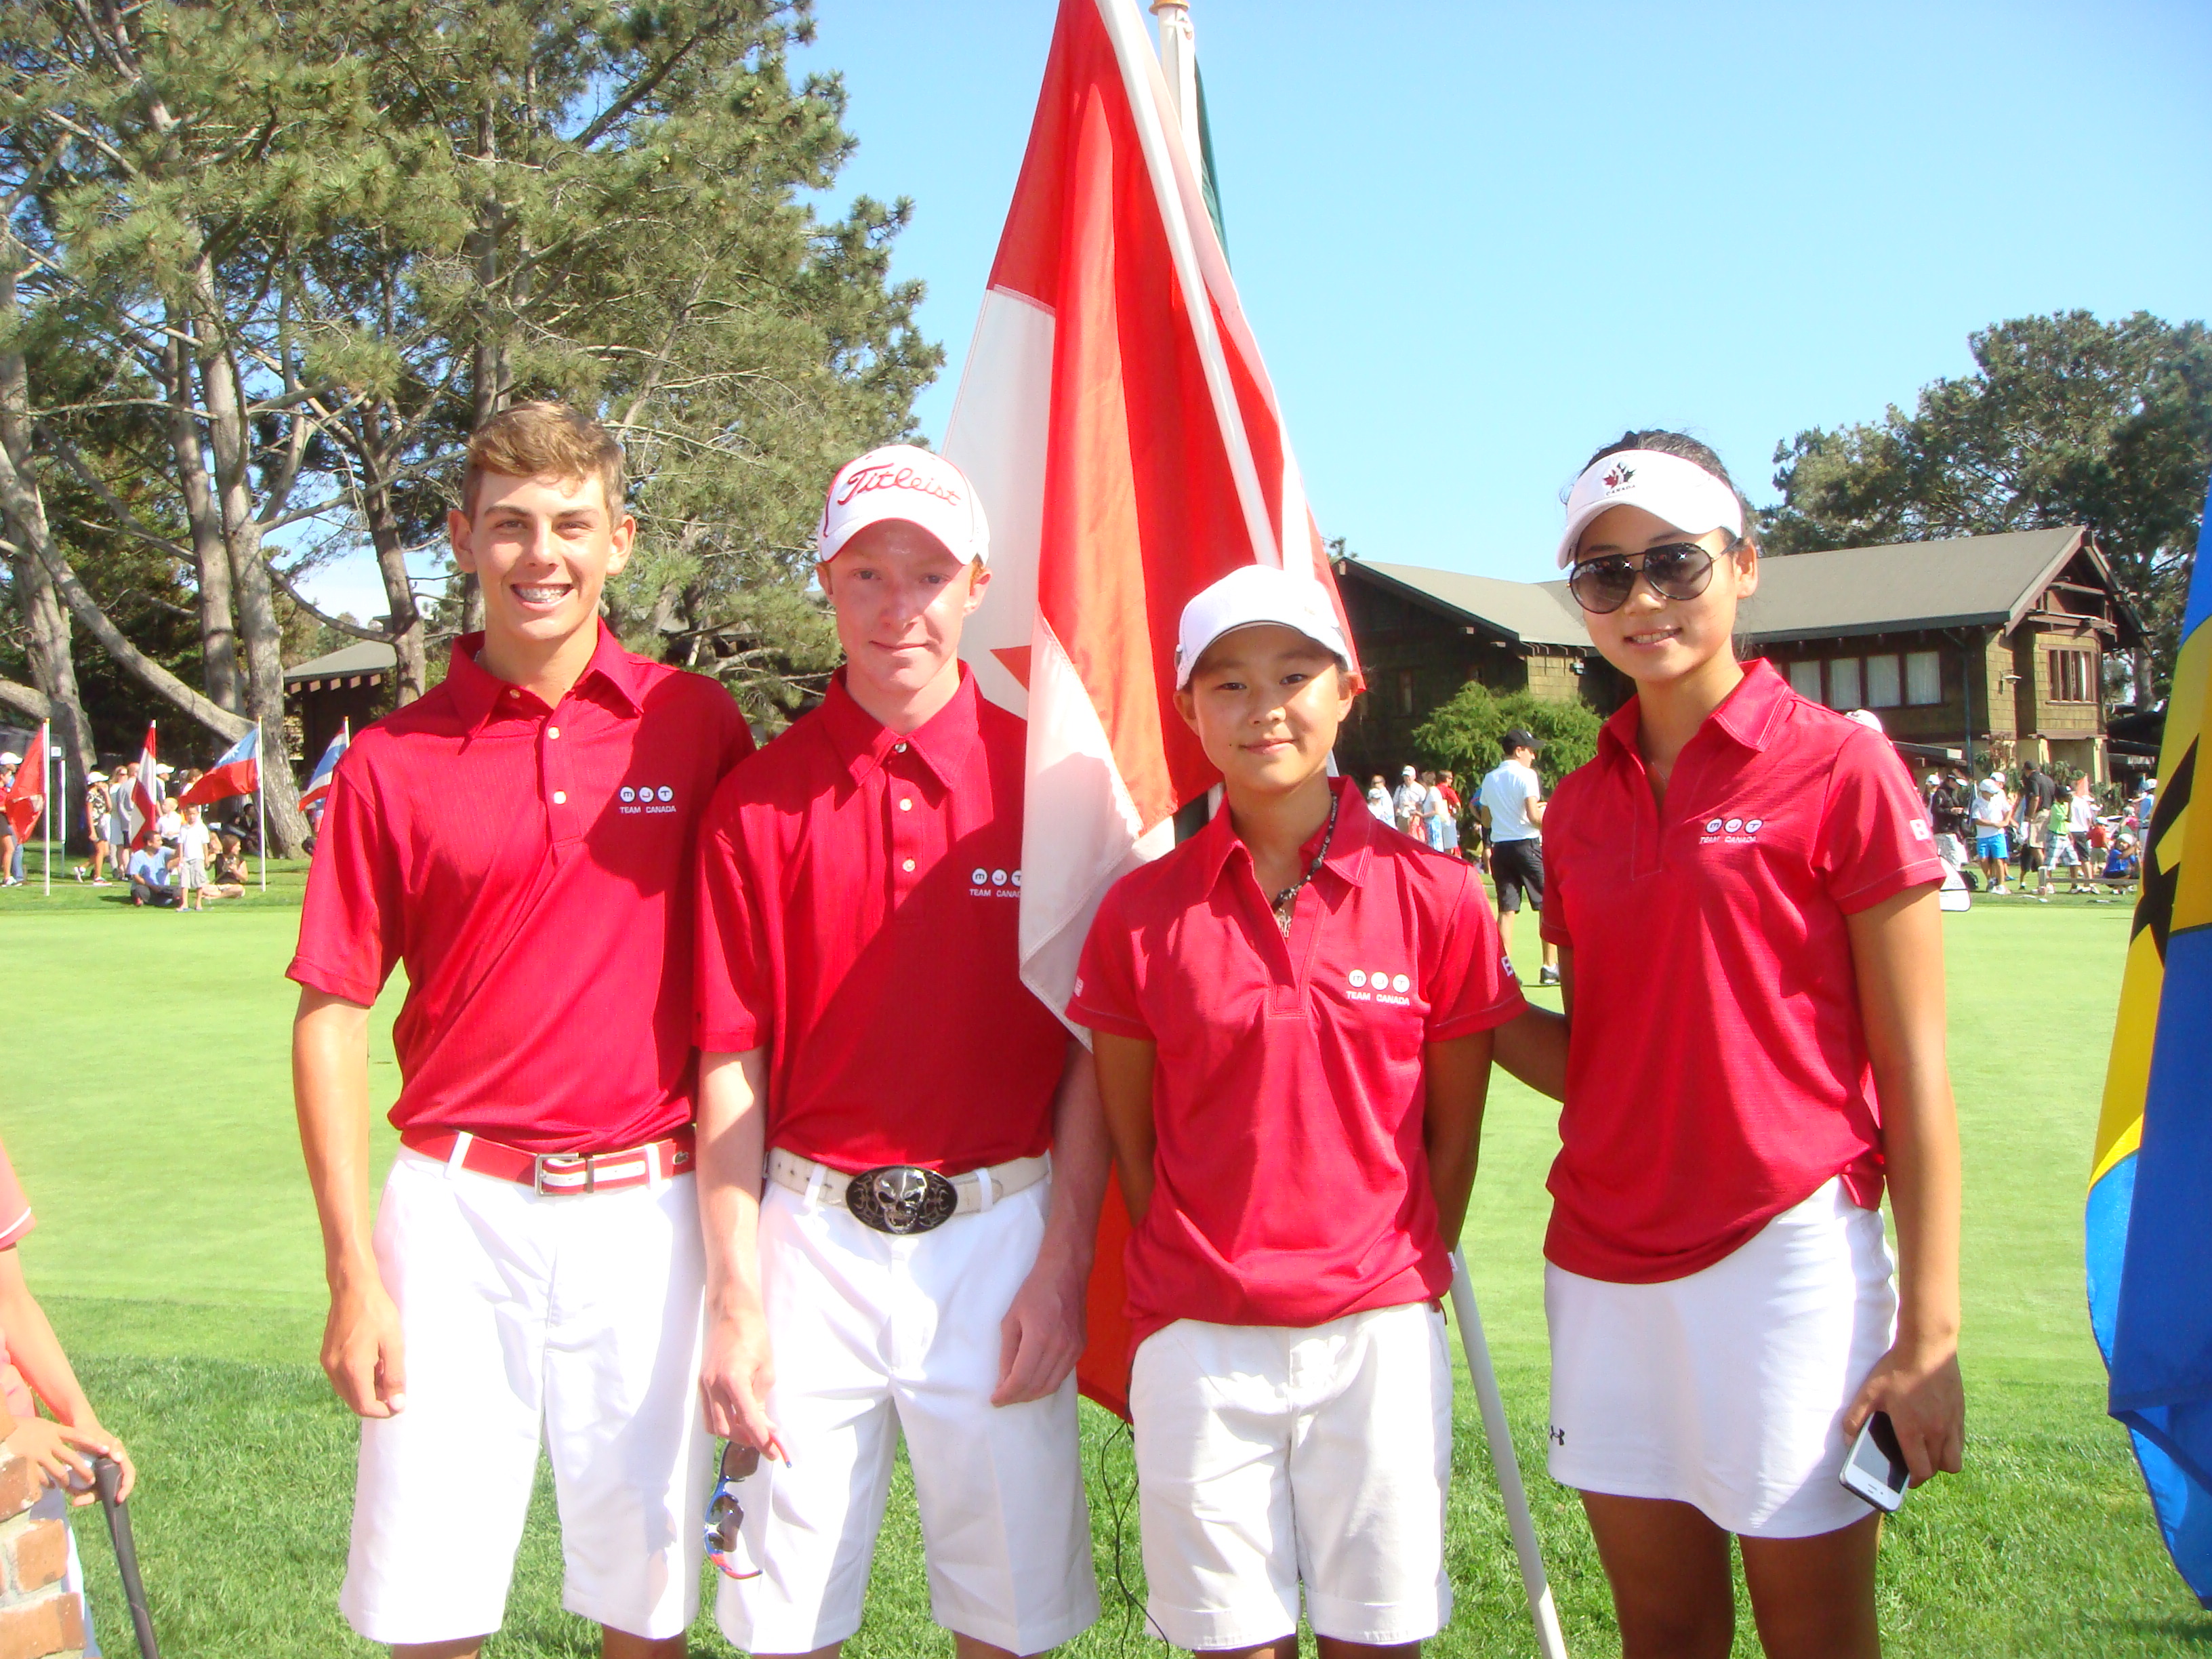 Murphy, Brown, Lau & Lim at the Junior Worlds